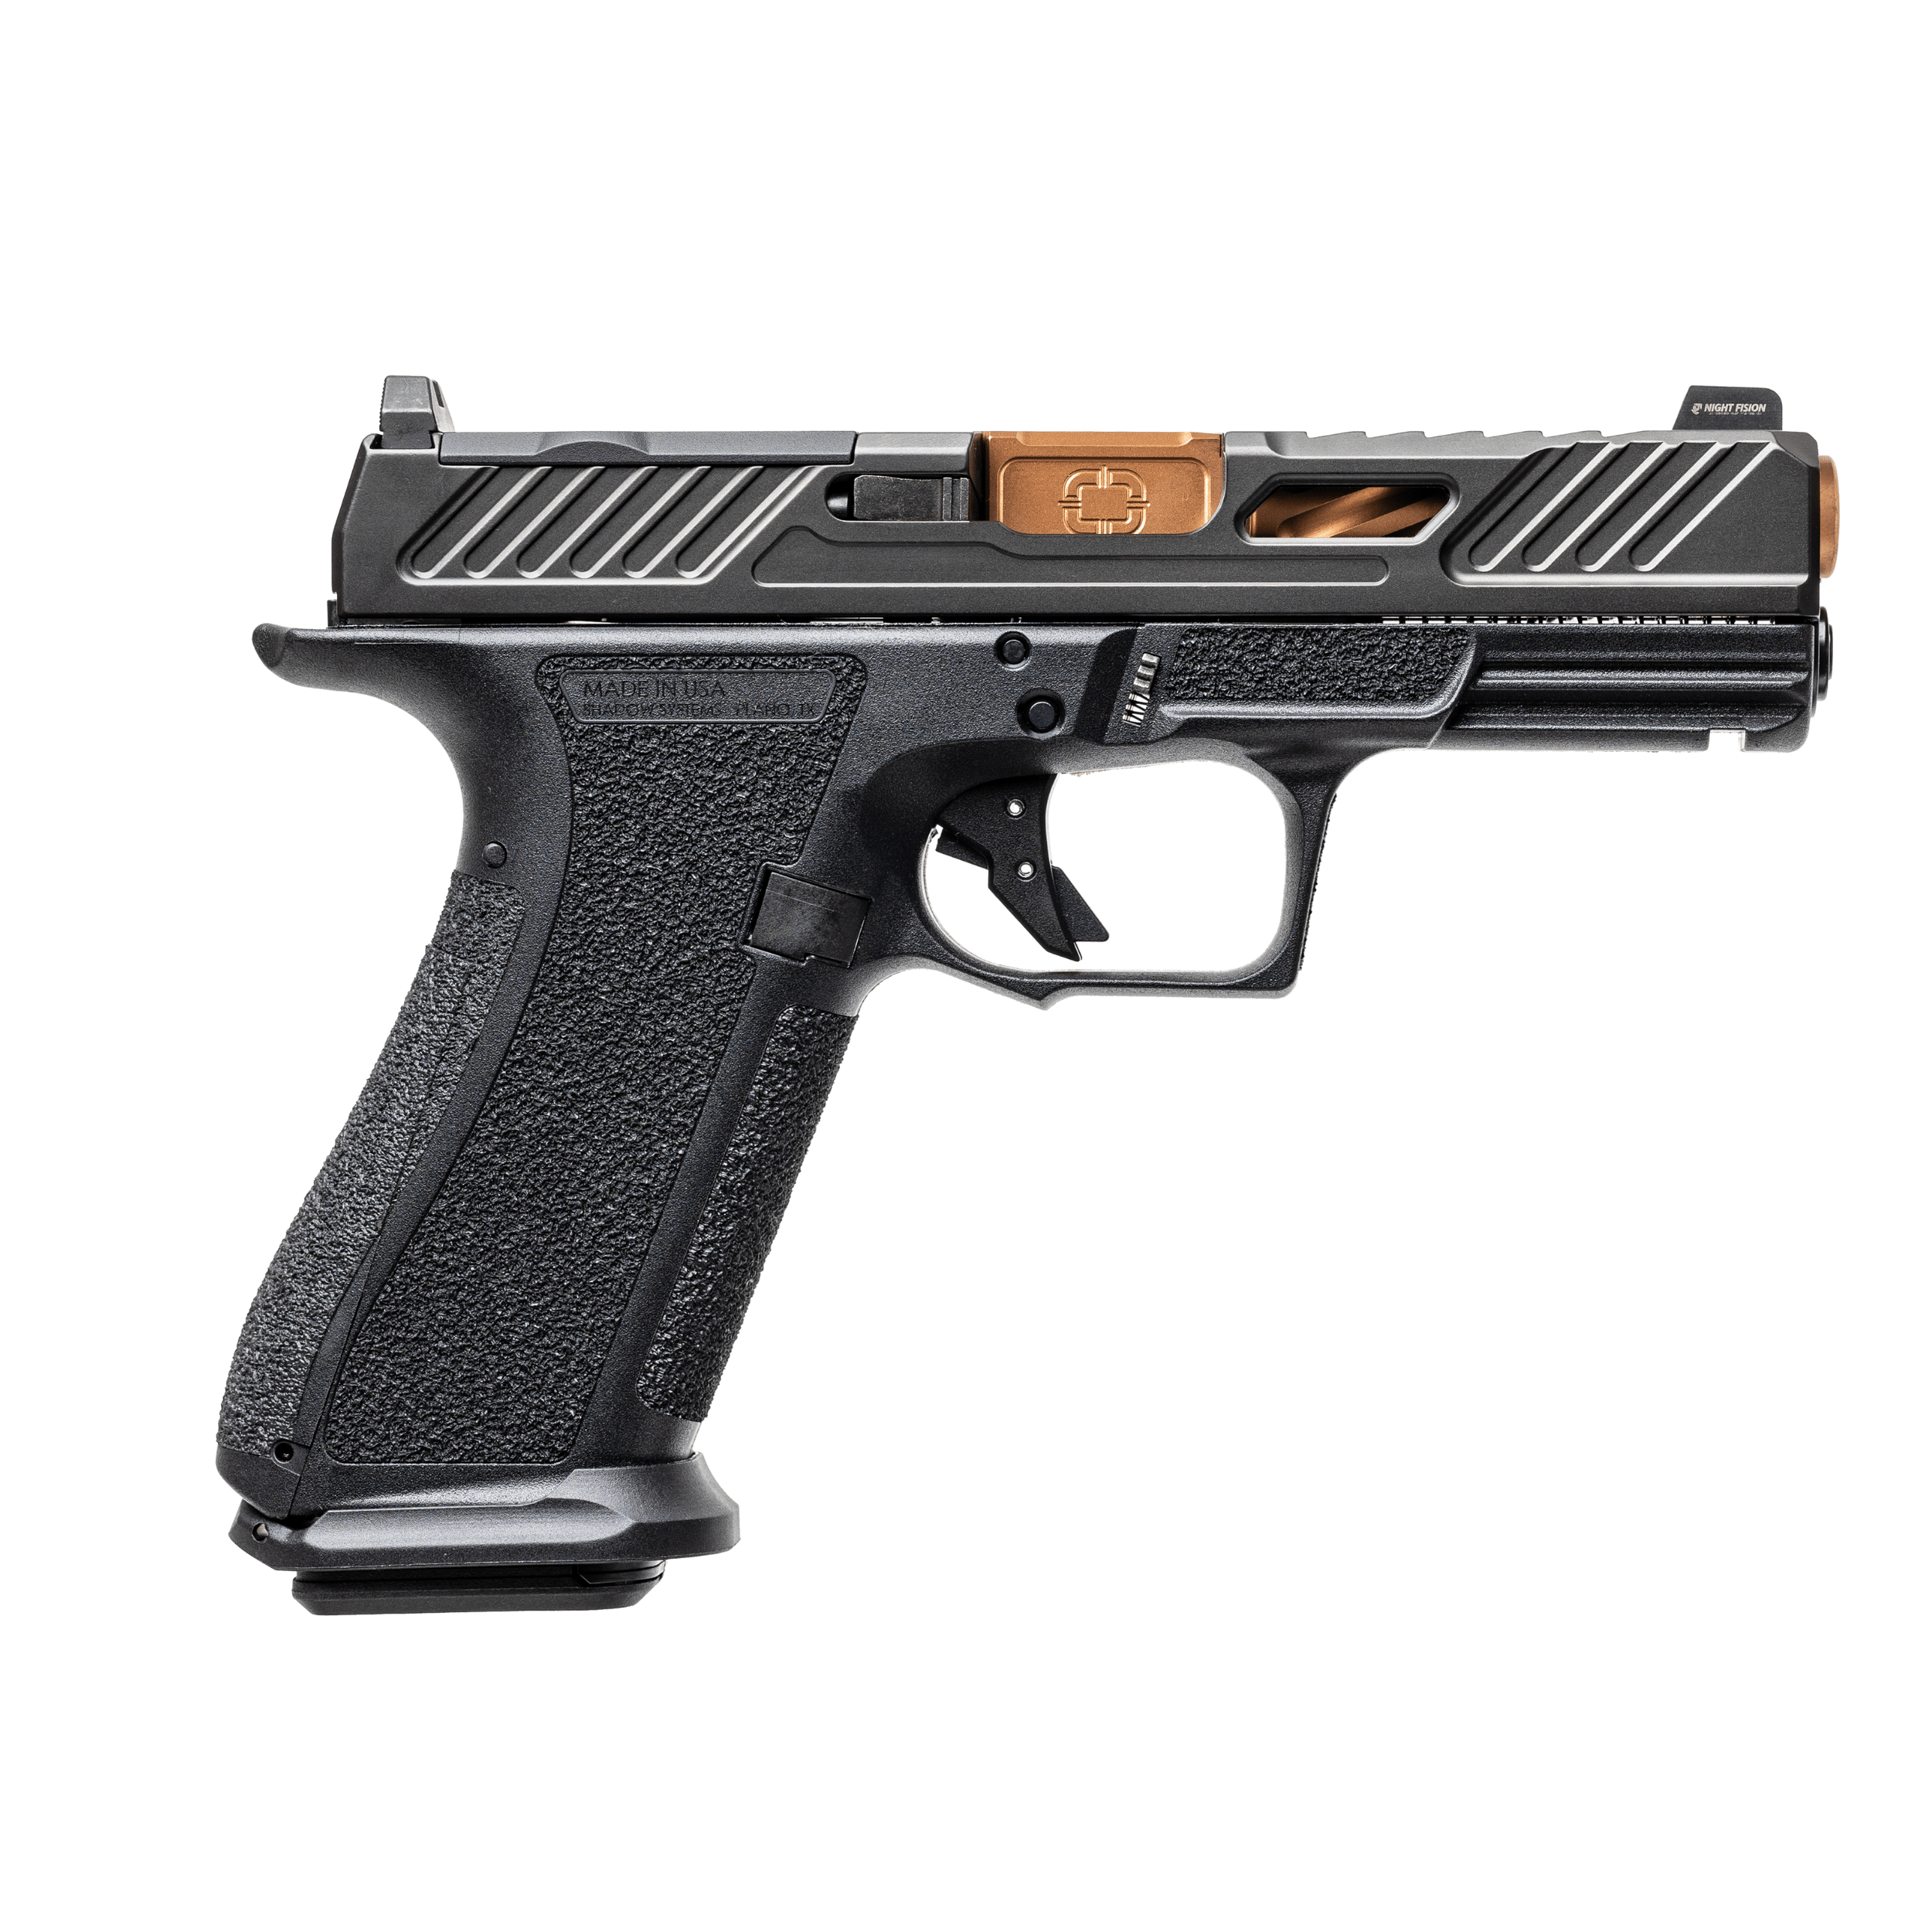 Shadow Systems XR920 Compact 9mm